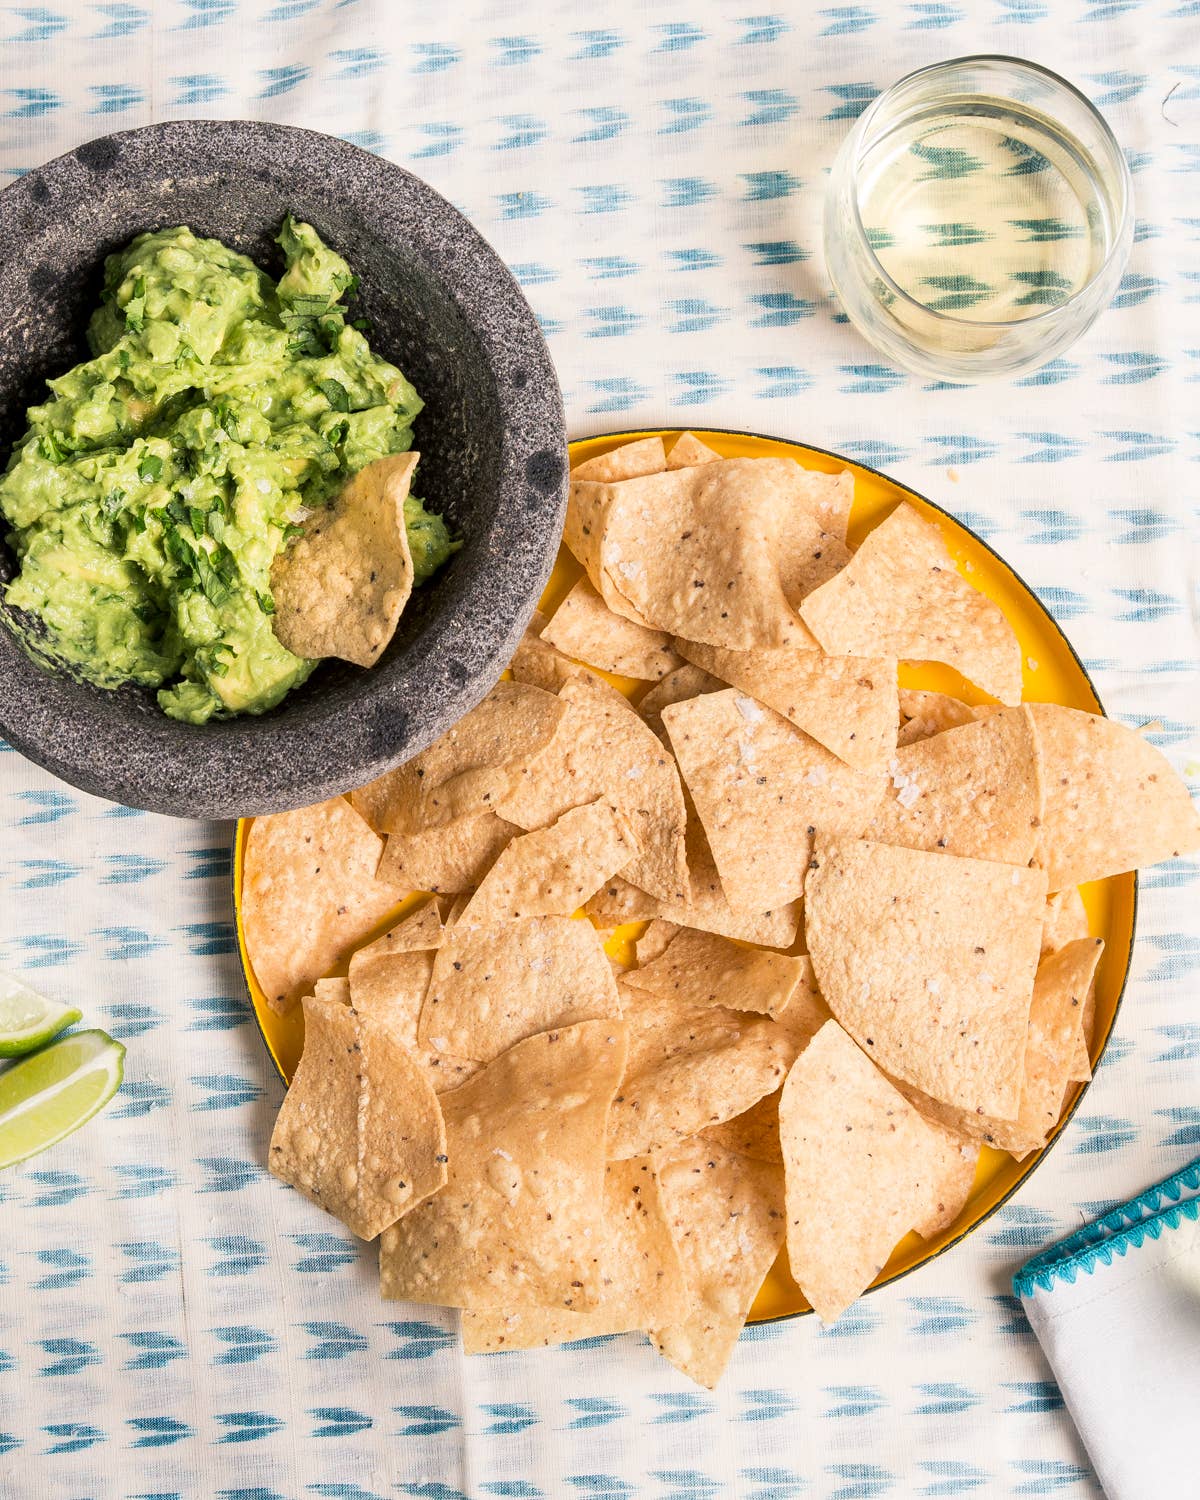 Your New Favorite Way to Make Guacamole